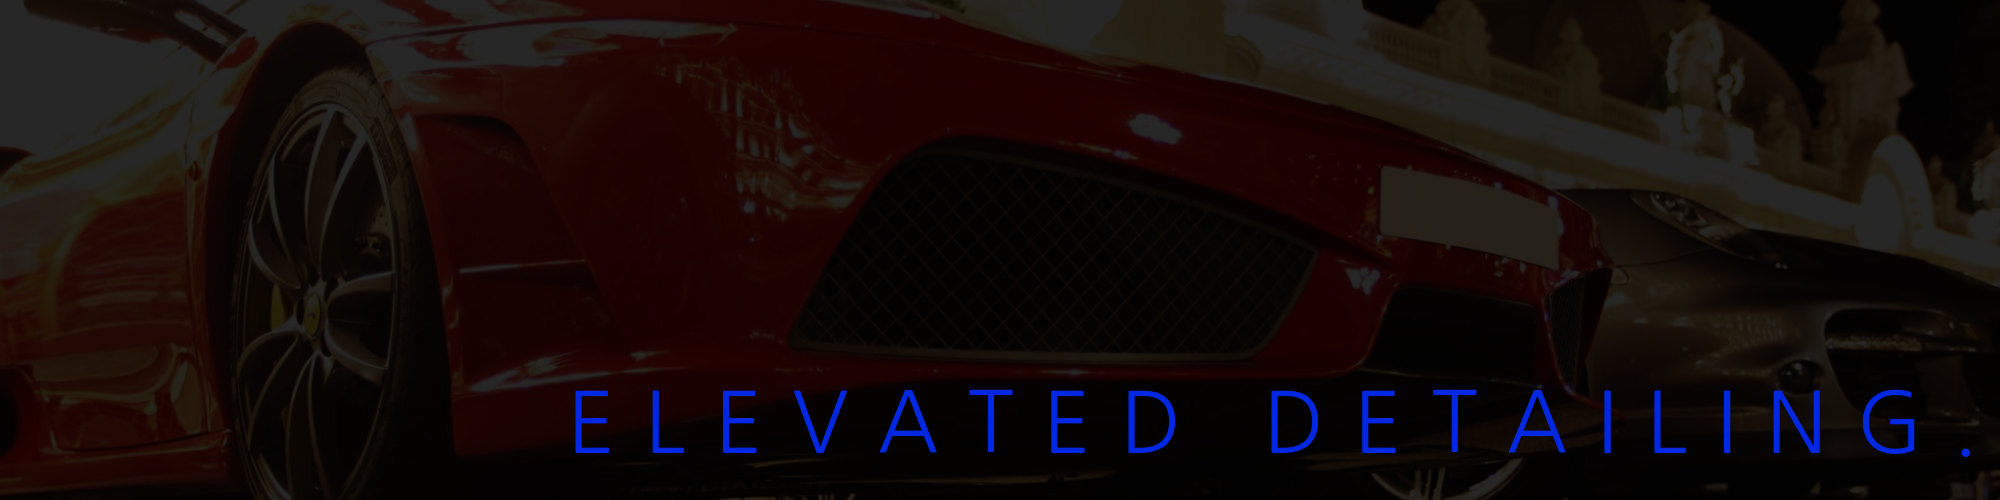 Elevated Auto Detailing 